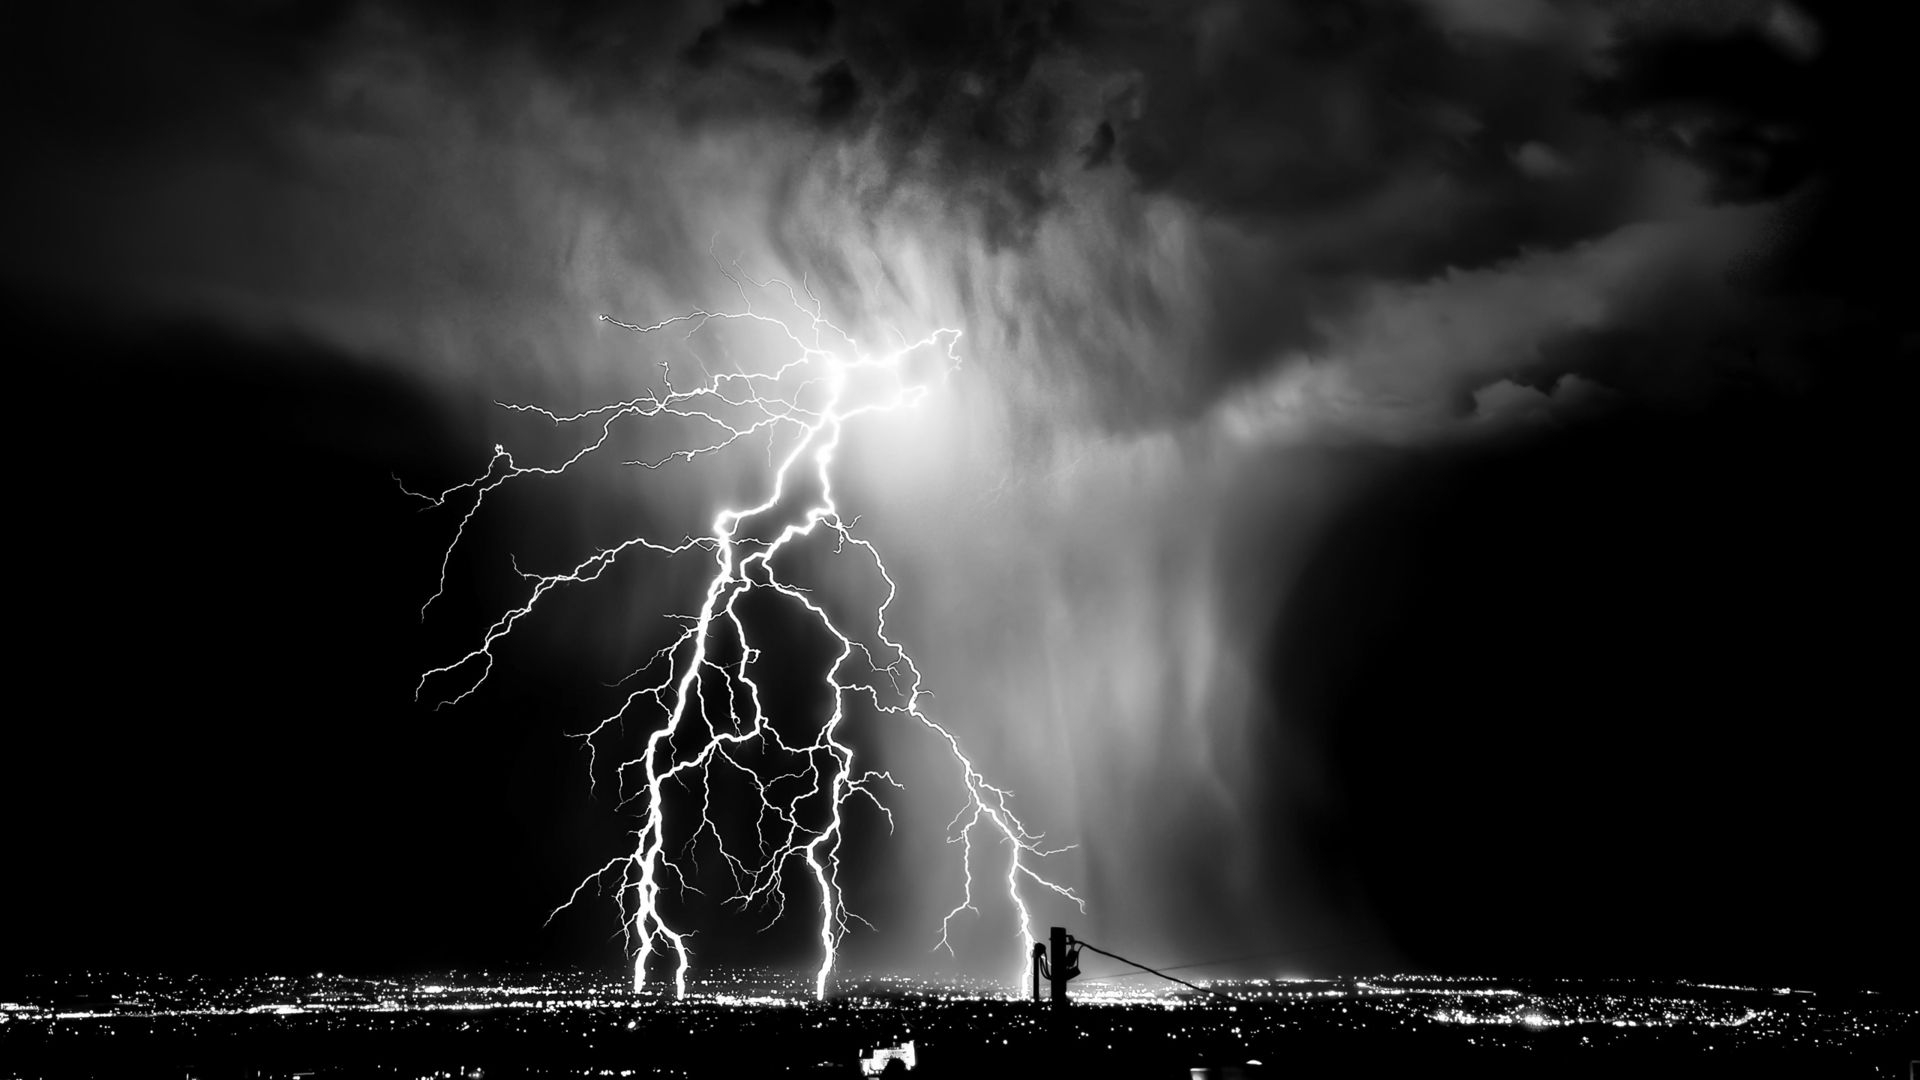 1920x1080 may there be darkness upon the land of Egypt, so dense that it may be felt&acirc;&#128;&brvbar; | Lightning photography, Lightning images, Lightning cloud